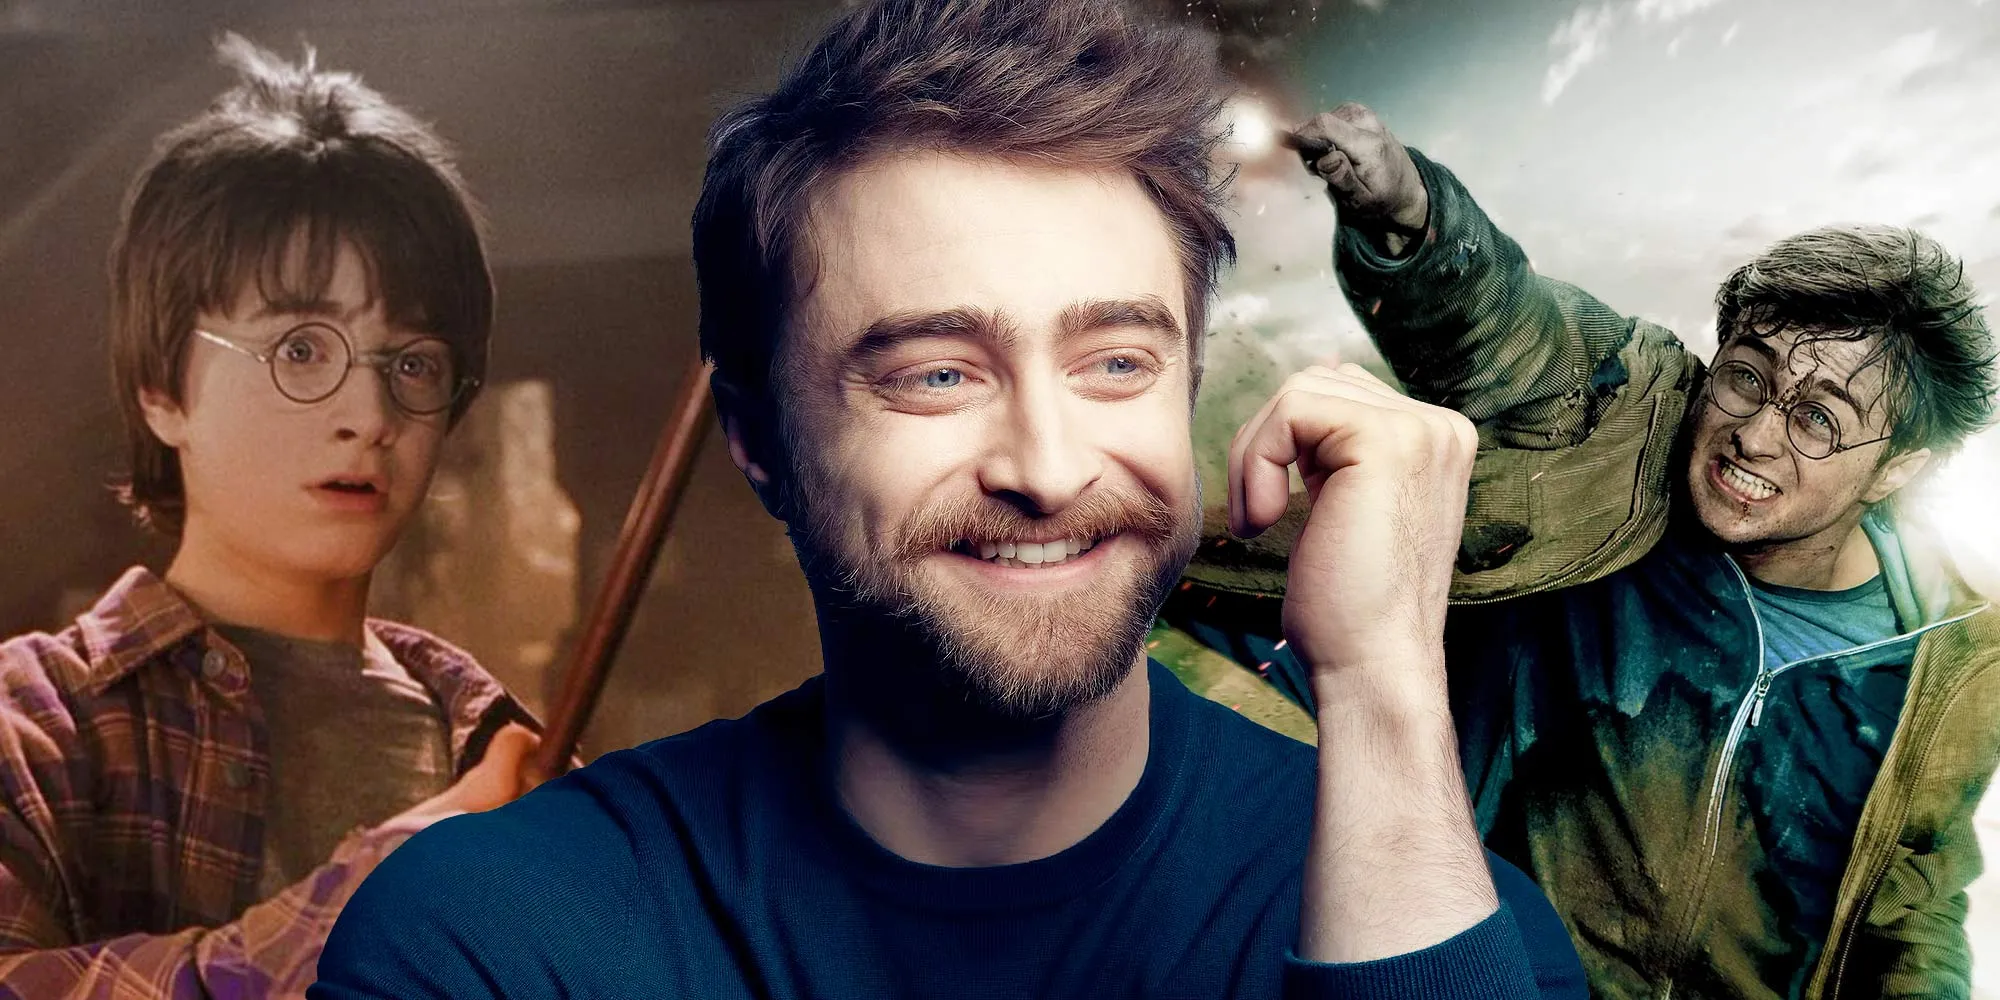 Which character did Daniel Radcliffe play in the film 'Swiss Army Man'?